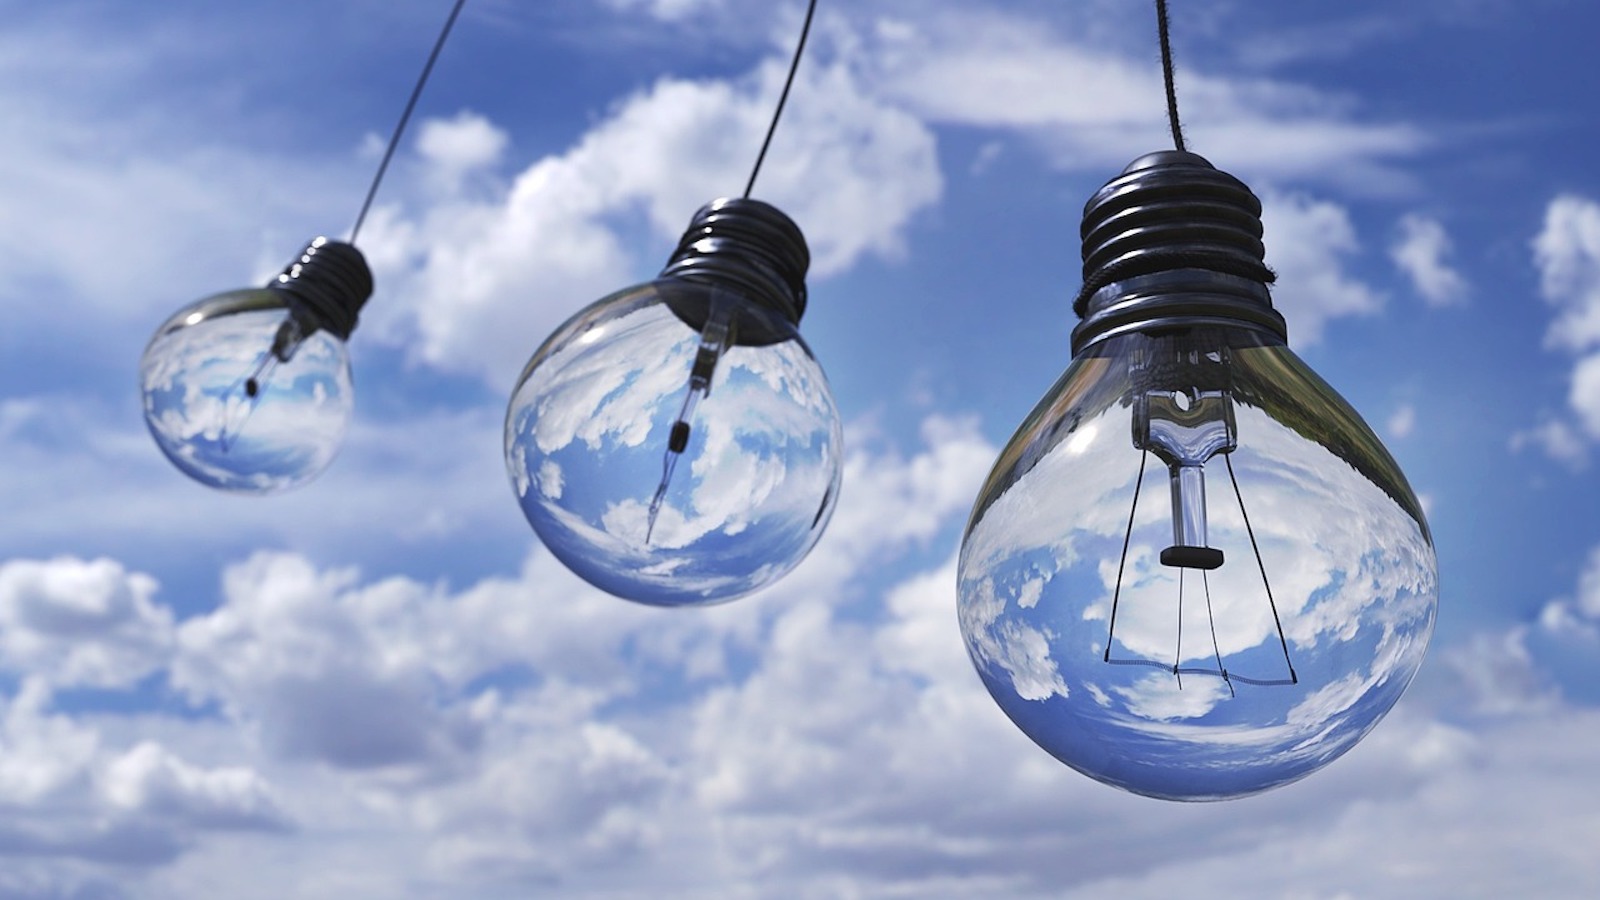 Three lightbulbs in front of a cloudy blue sky